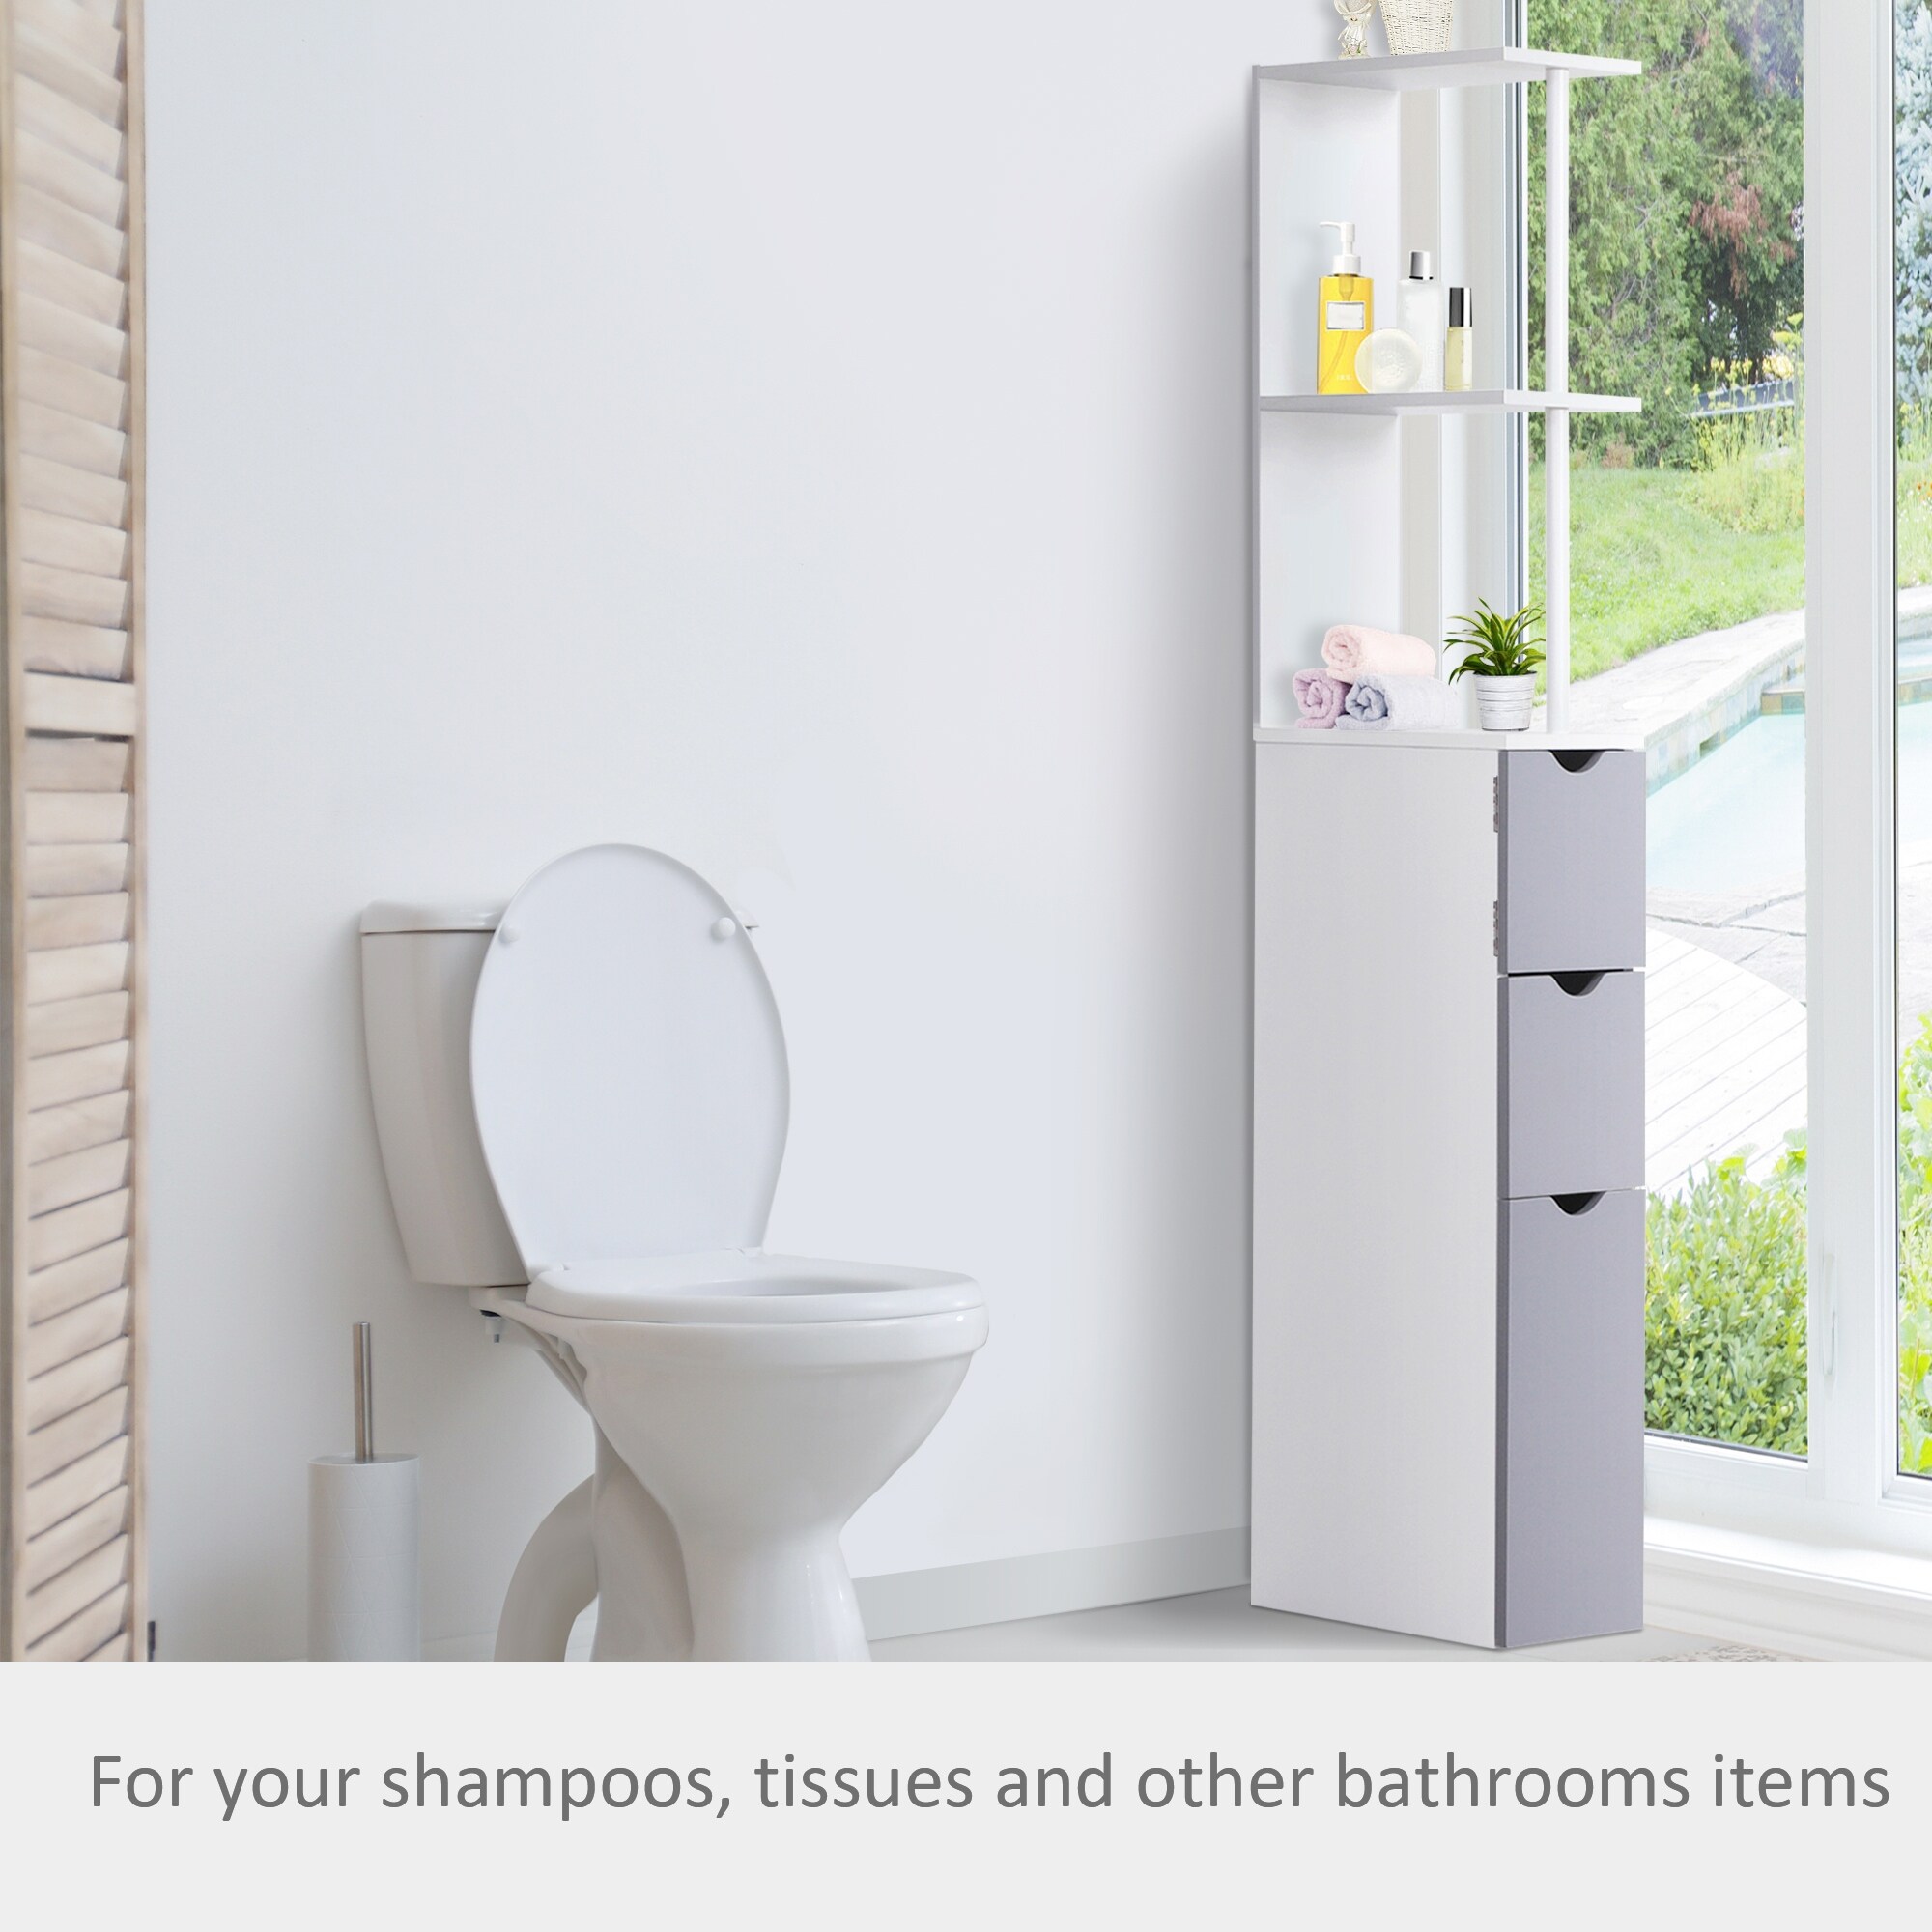 https://ak1.ostkcdn.com/images/products/is/images/direct/e85baa7c5c546d2d3f0b6305cea2185b9fc788a1/Bathroom-Tower-Storage-Cabinet.jpg